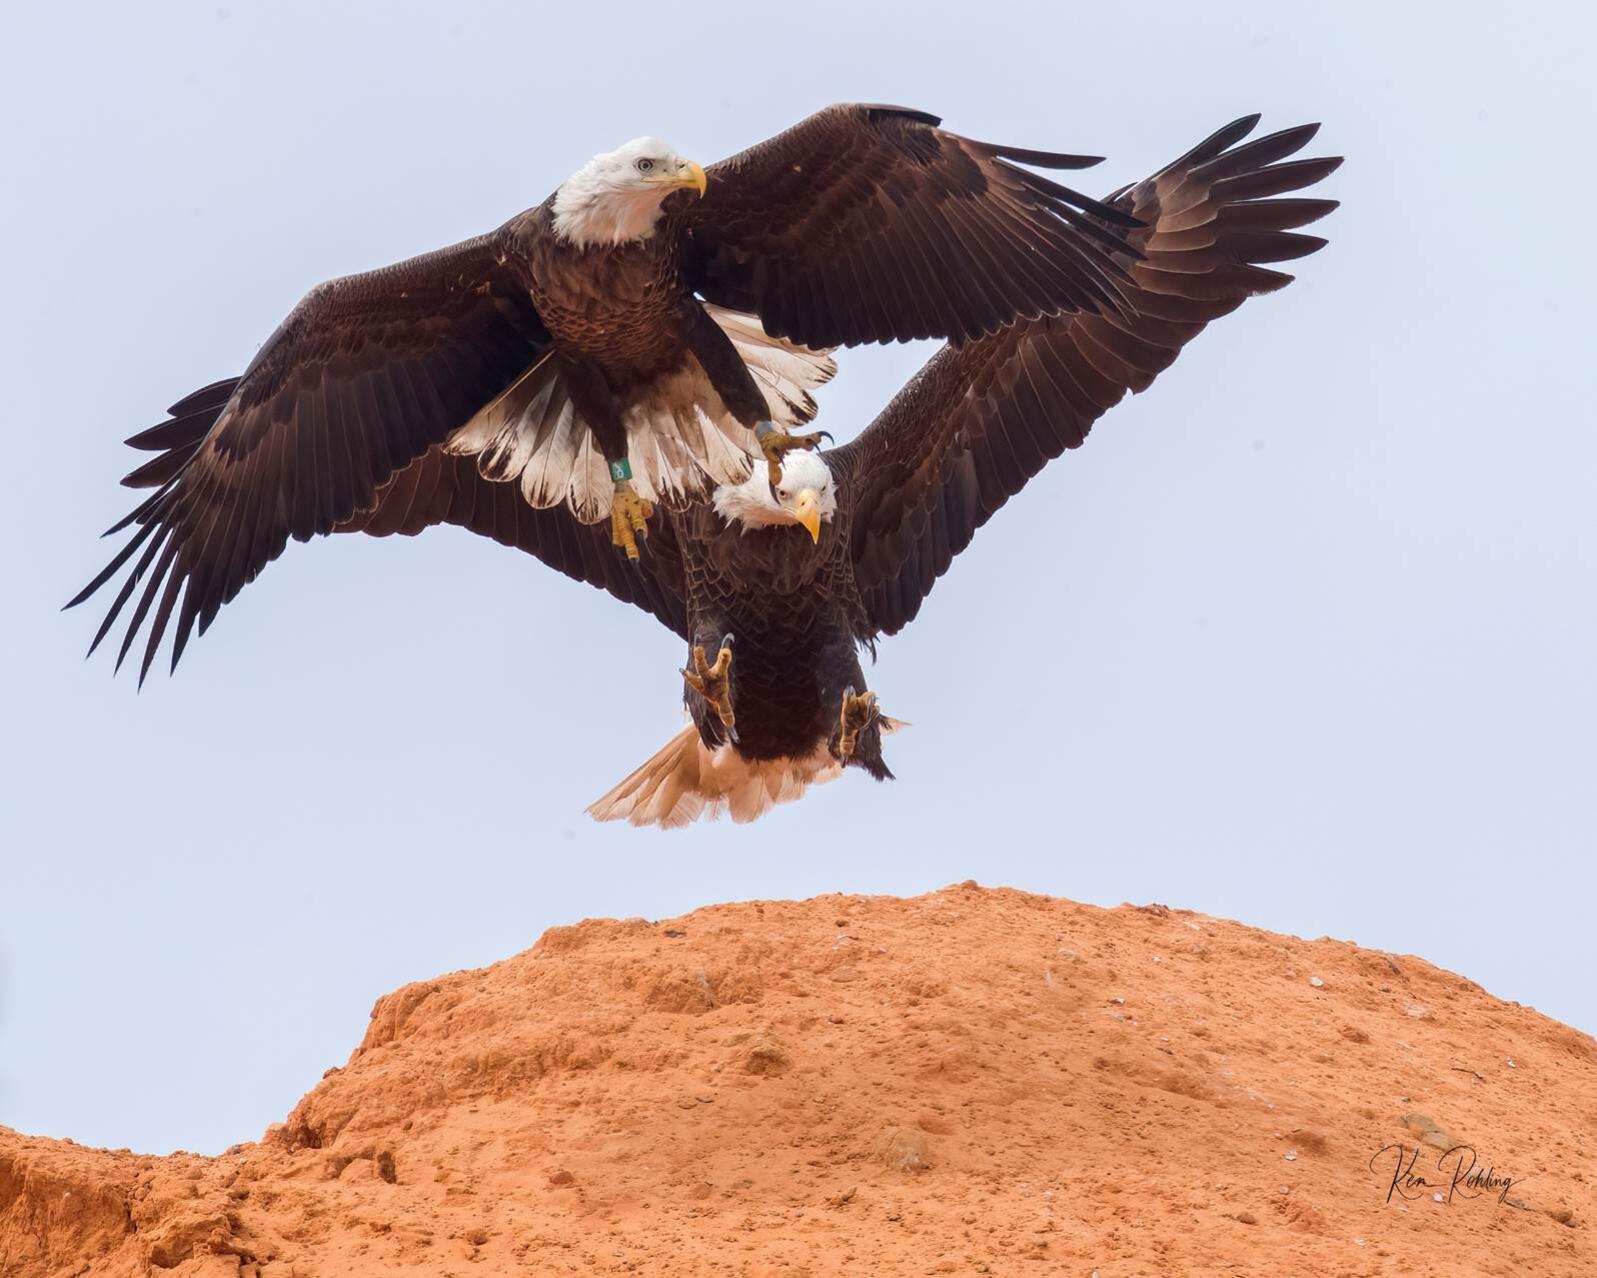 Two bald eagles in flight